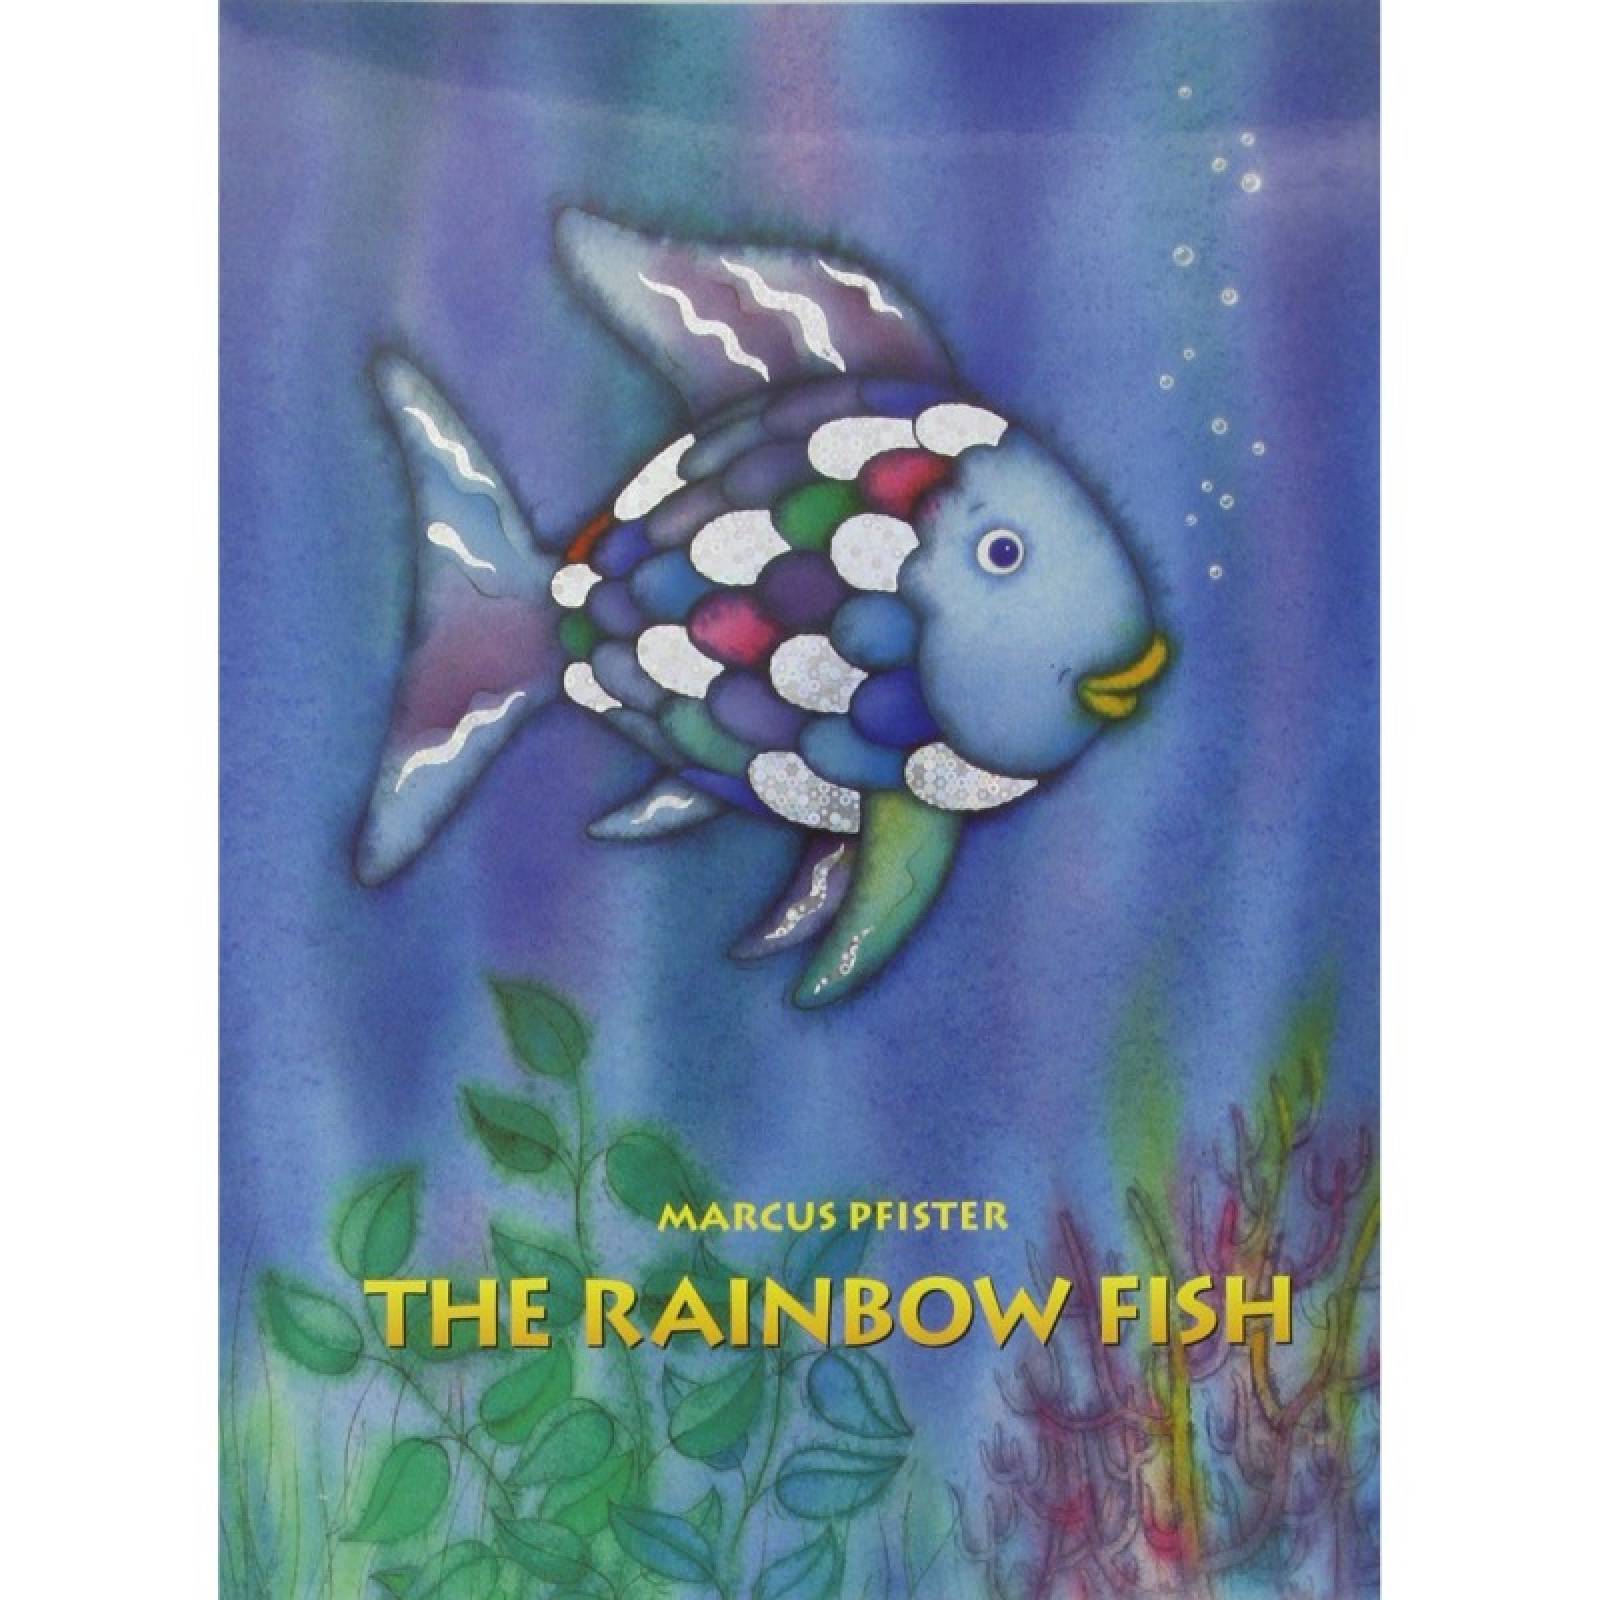 The Rainbow Fish By Marcus Pfister - Paperback Book